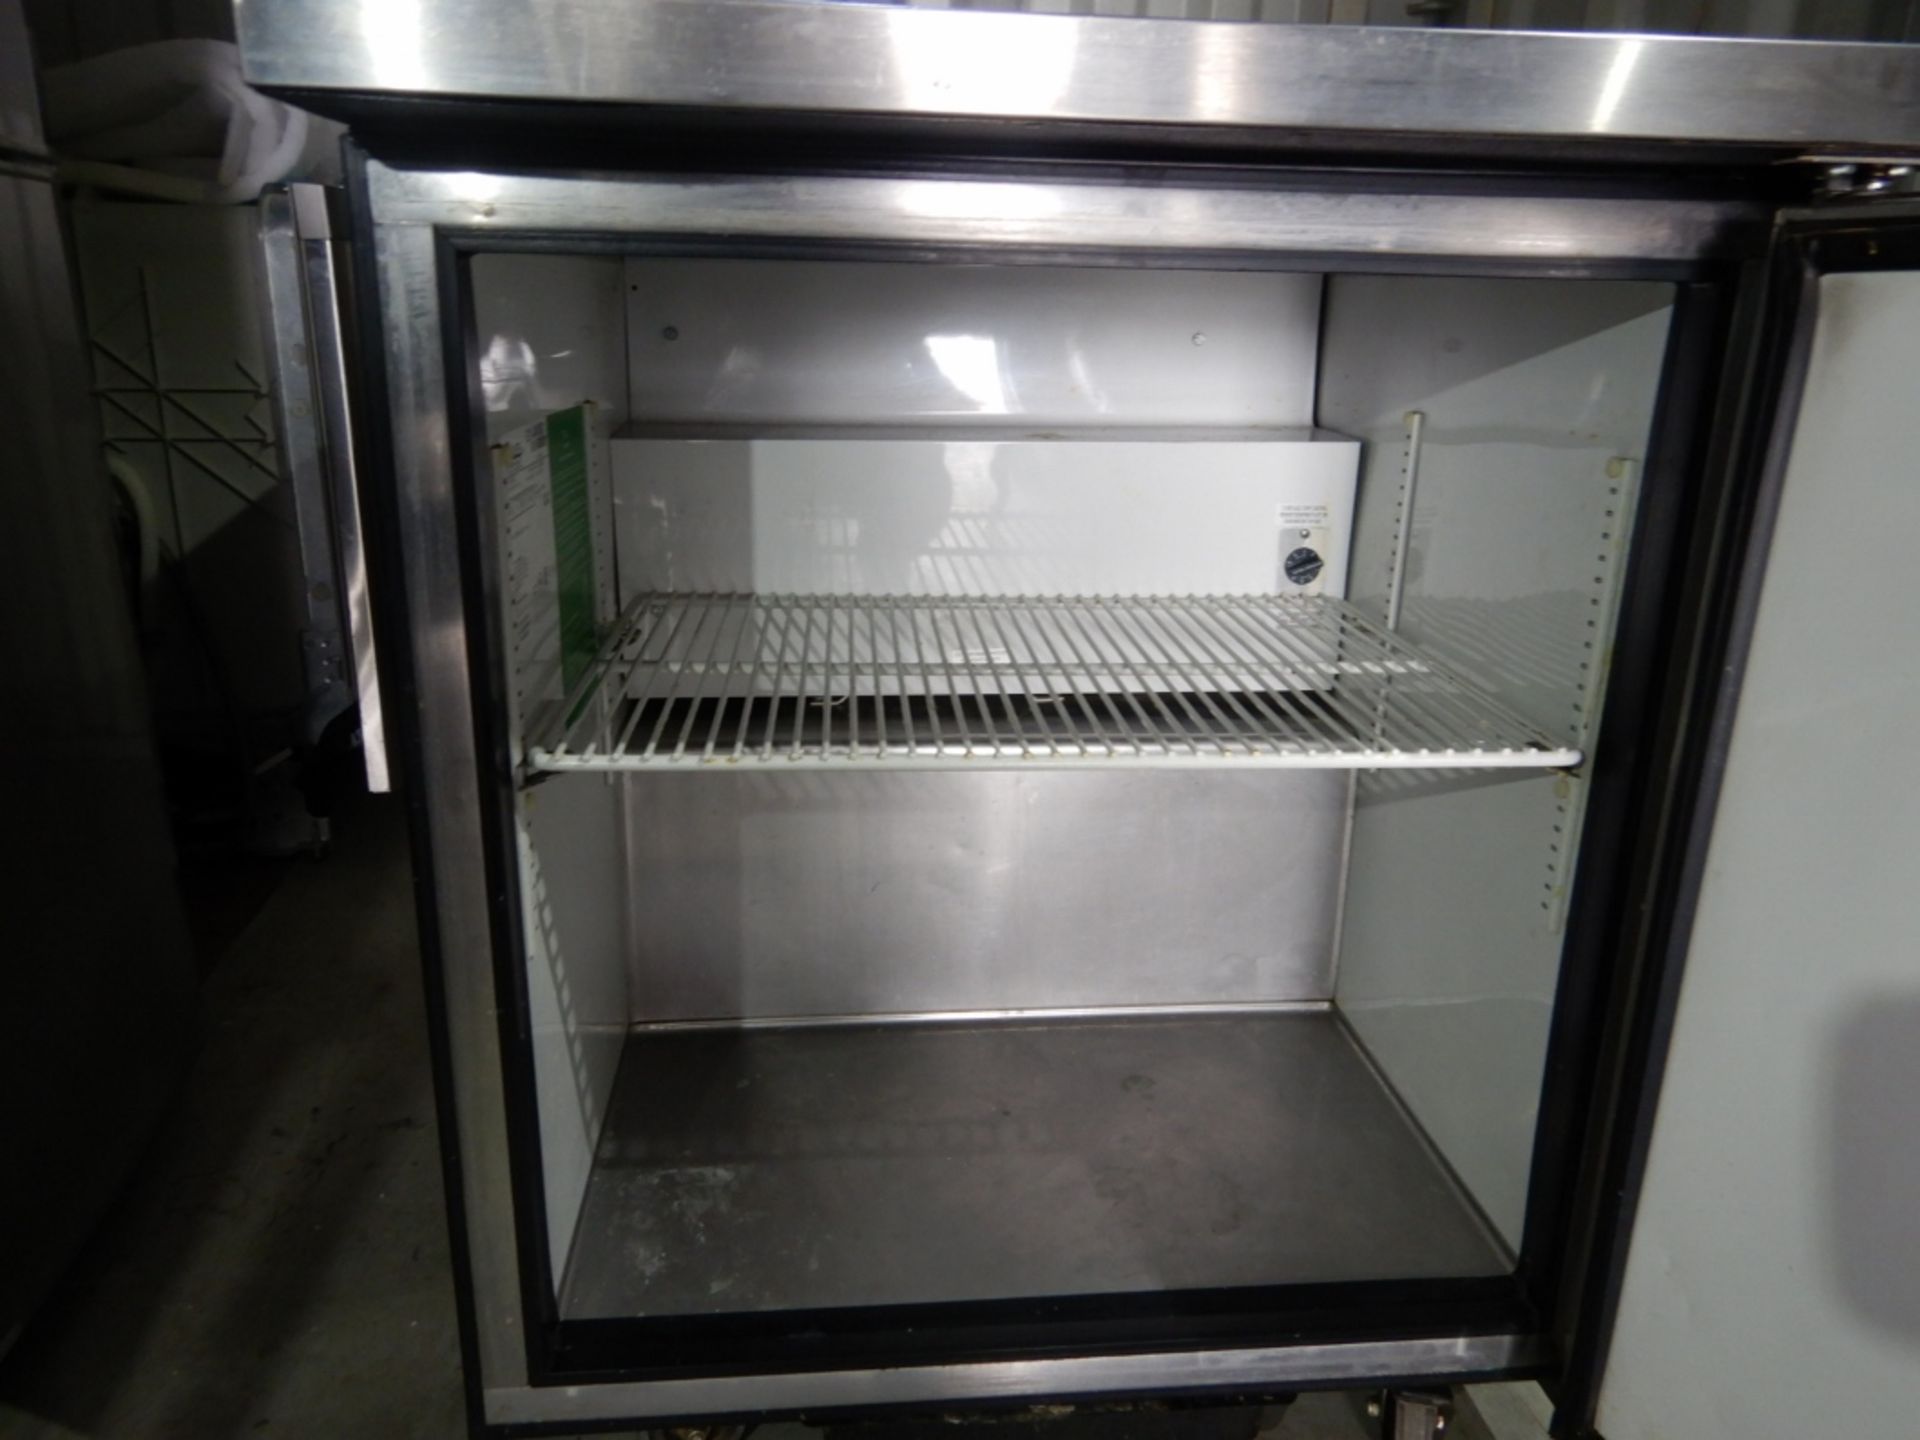 TRUE UNDERCOUNTER REFRIGERATION UNIT - TUC-27 W/ STAINLESS STEEL TOP, S/N 1-3410931, R134a - Image 5 of 8